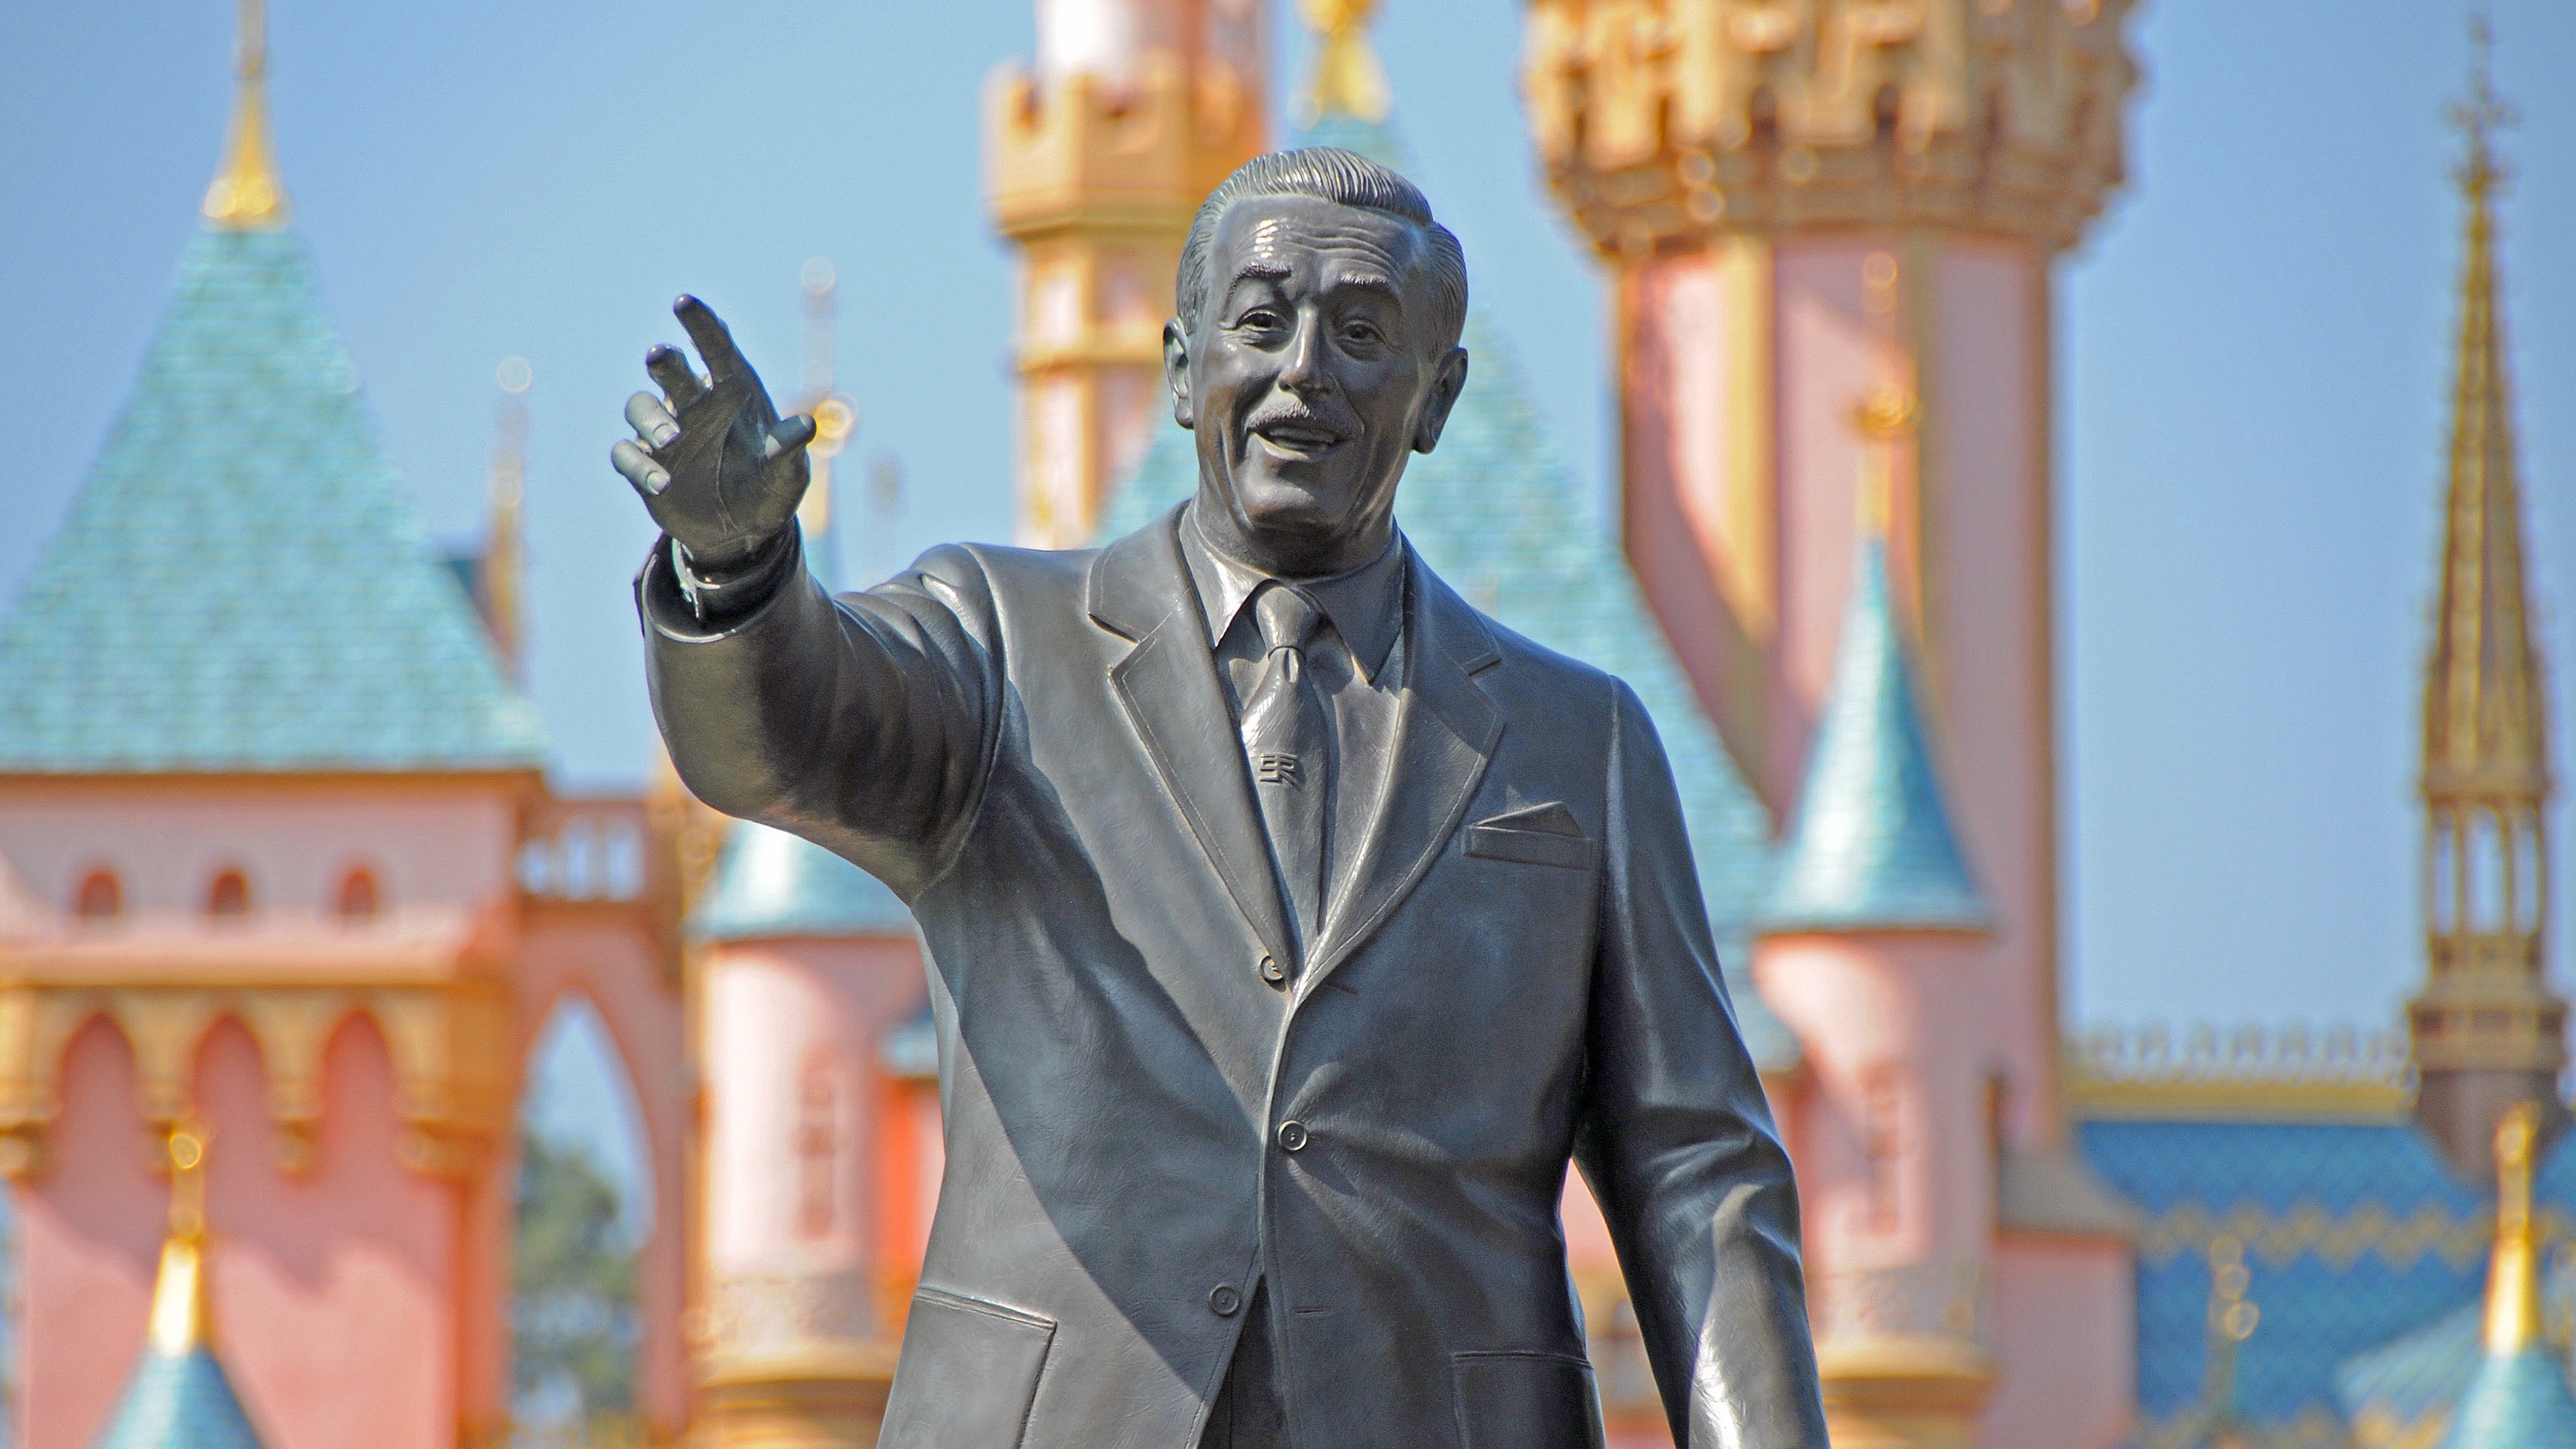 Disneyland Resort Announces the Return of Guided Tours